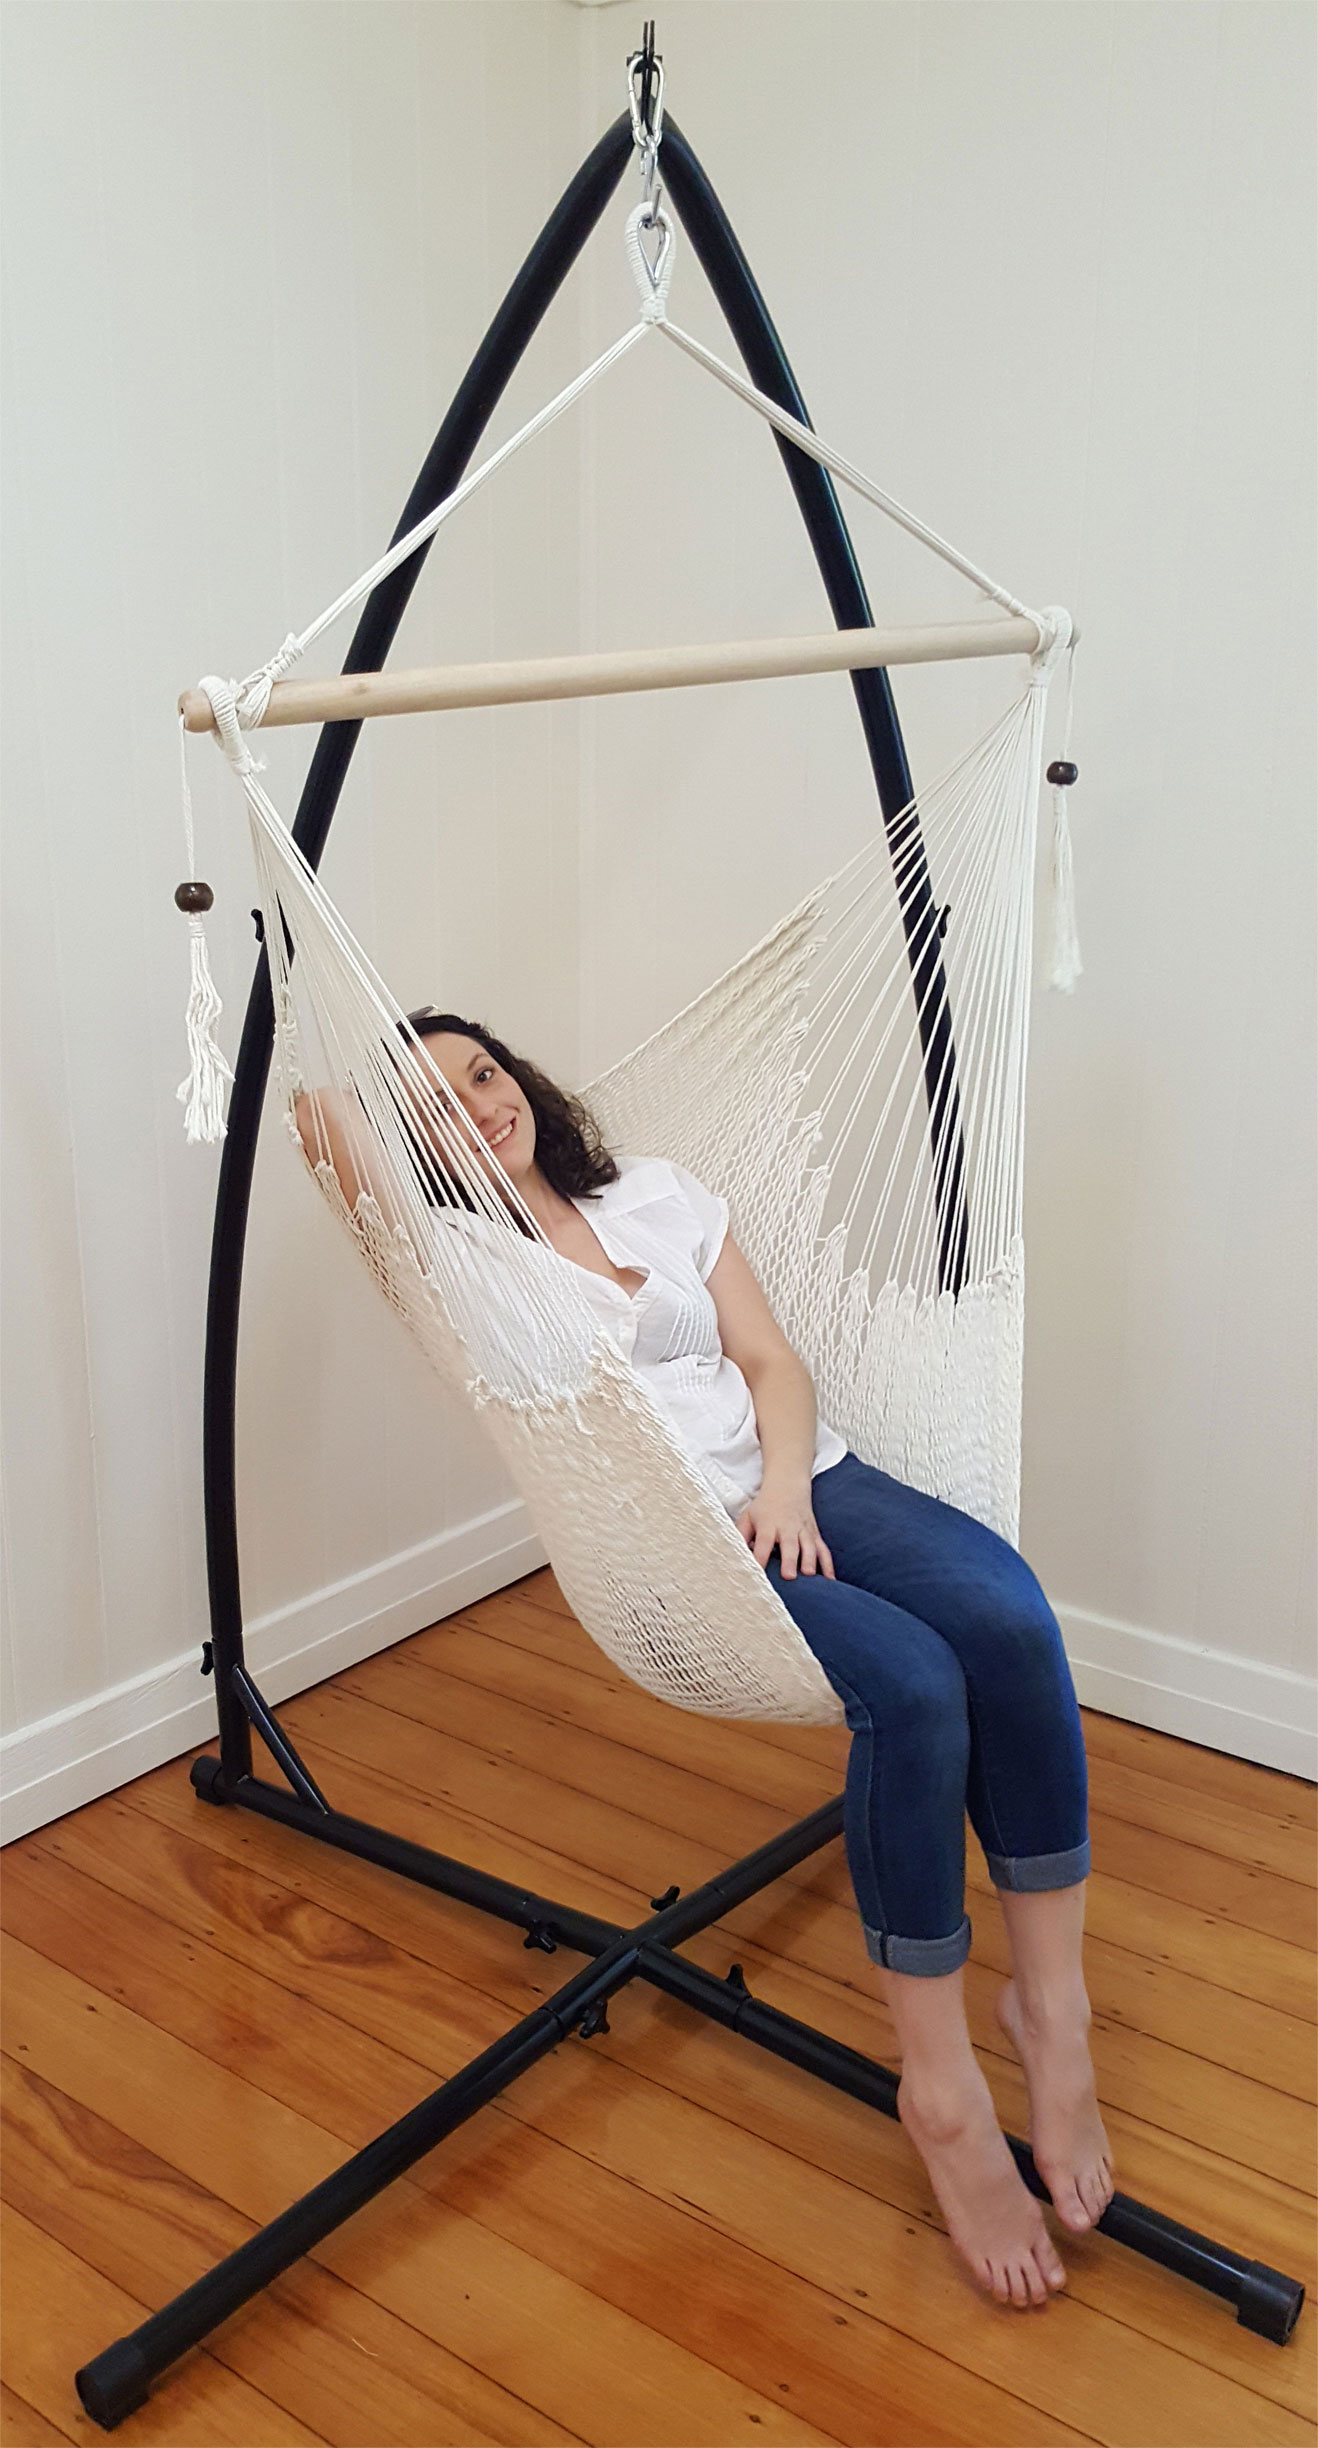 White Cotton Rope Hammock Chair With Tassels With Stand